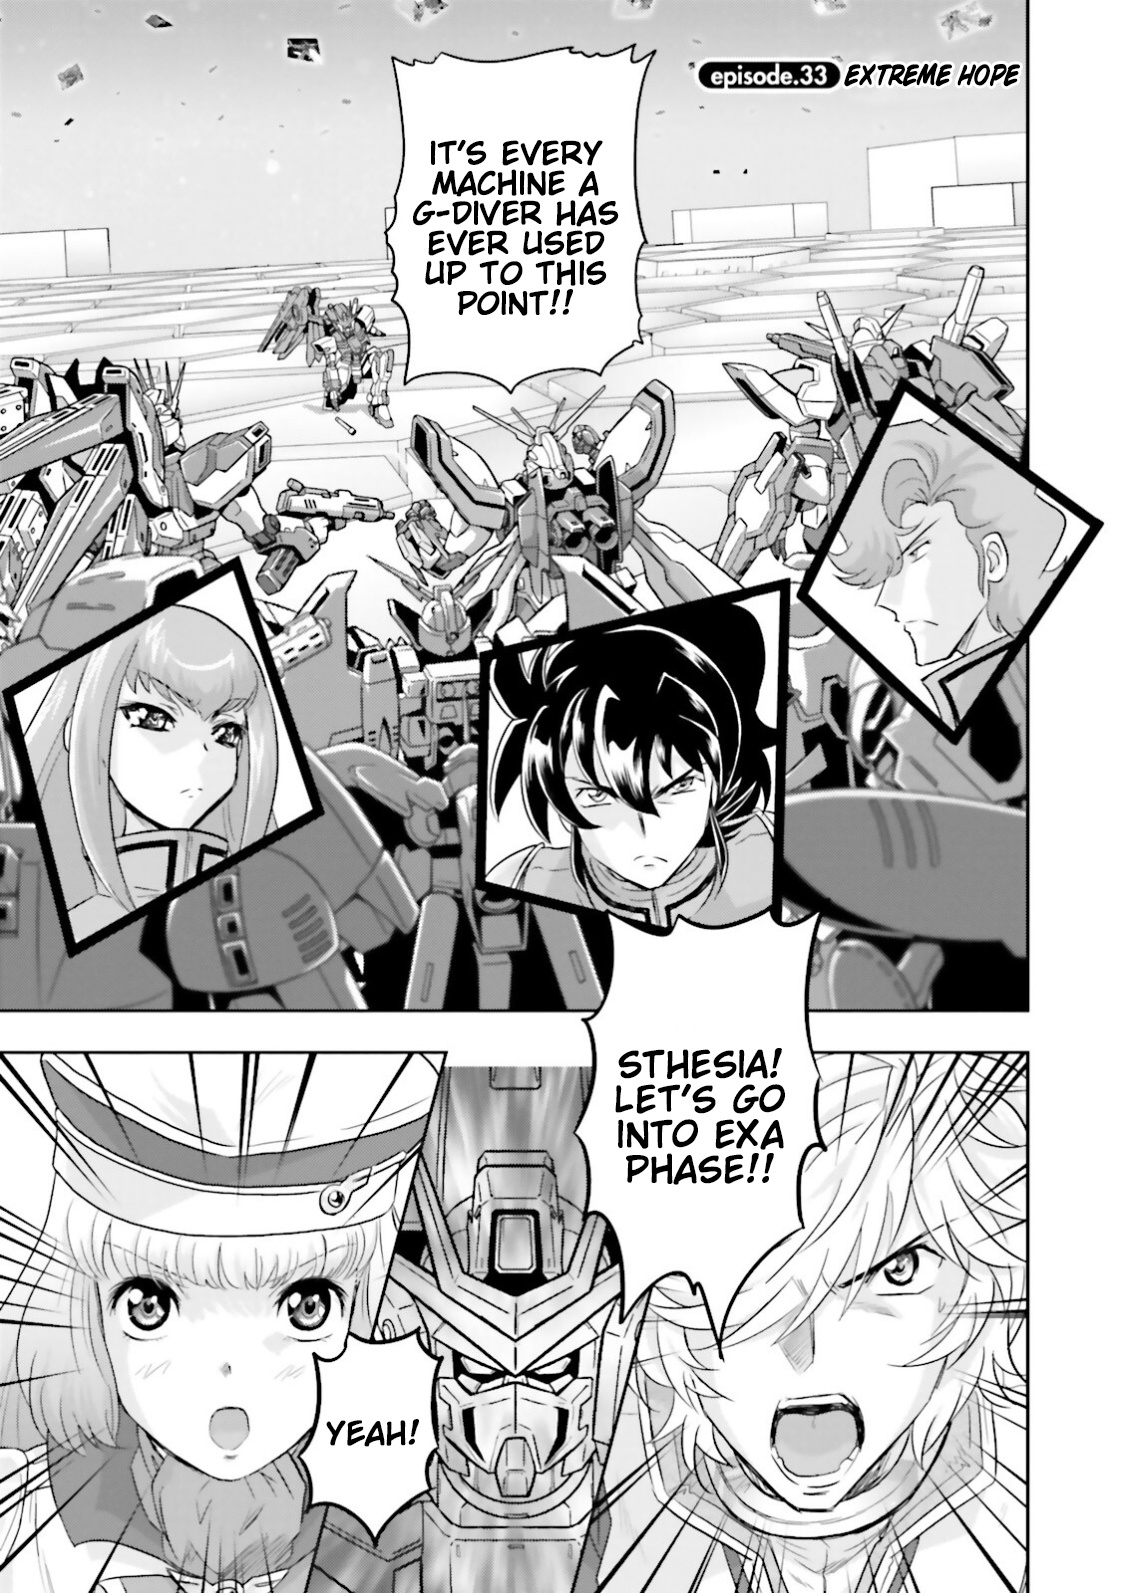 Gundam Exa Vol.7 Chapter 33: Extreme Hope - Picture 1